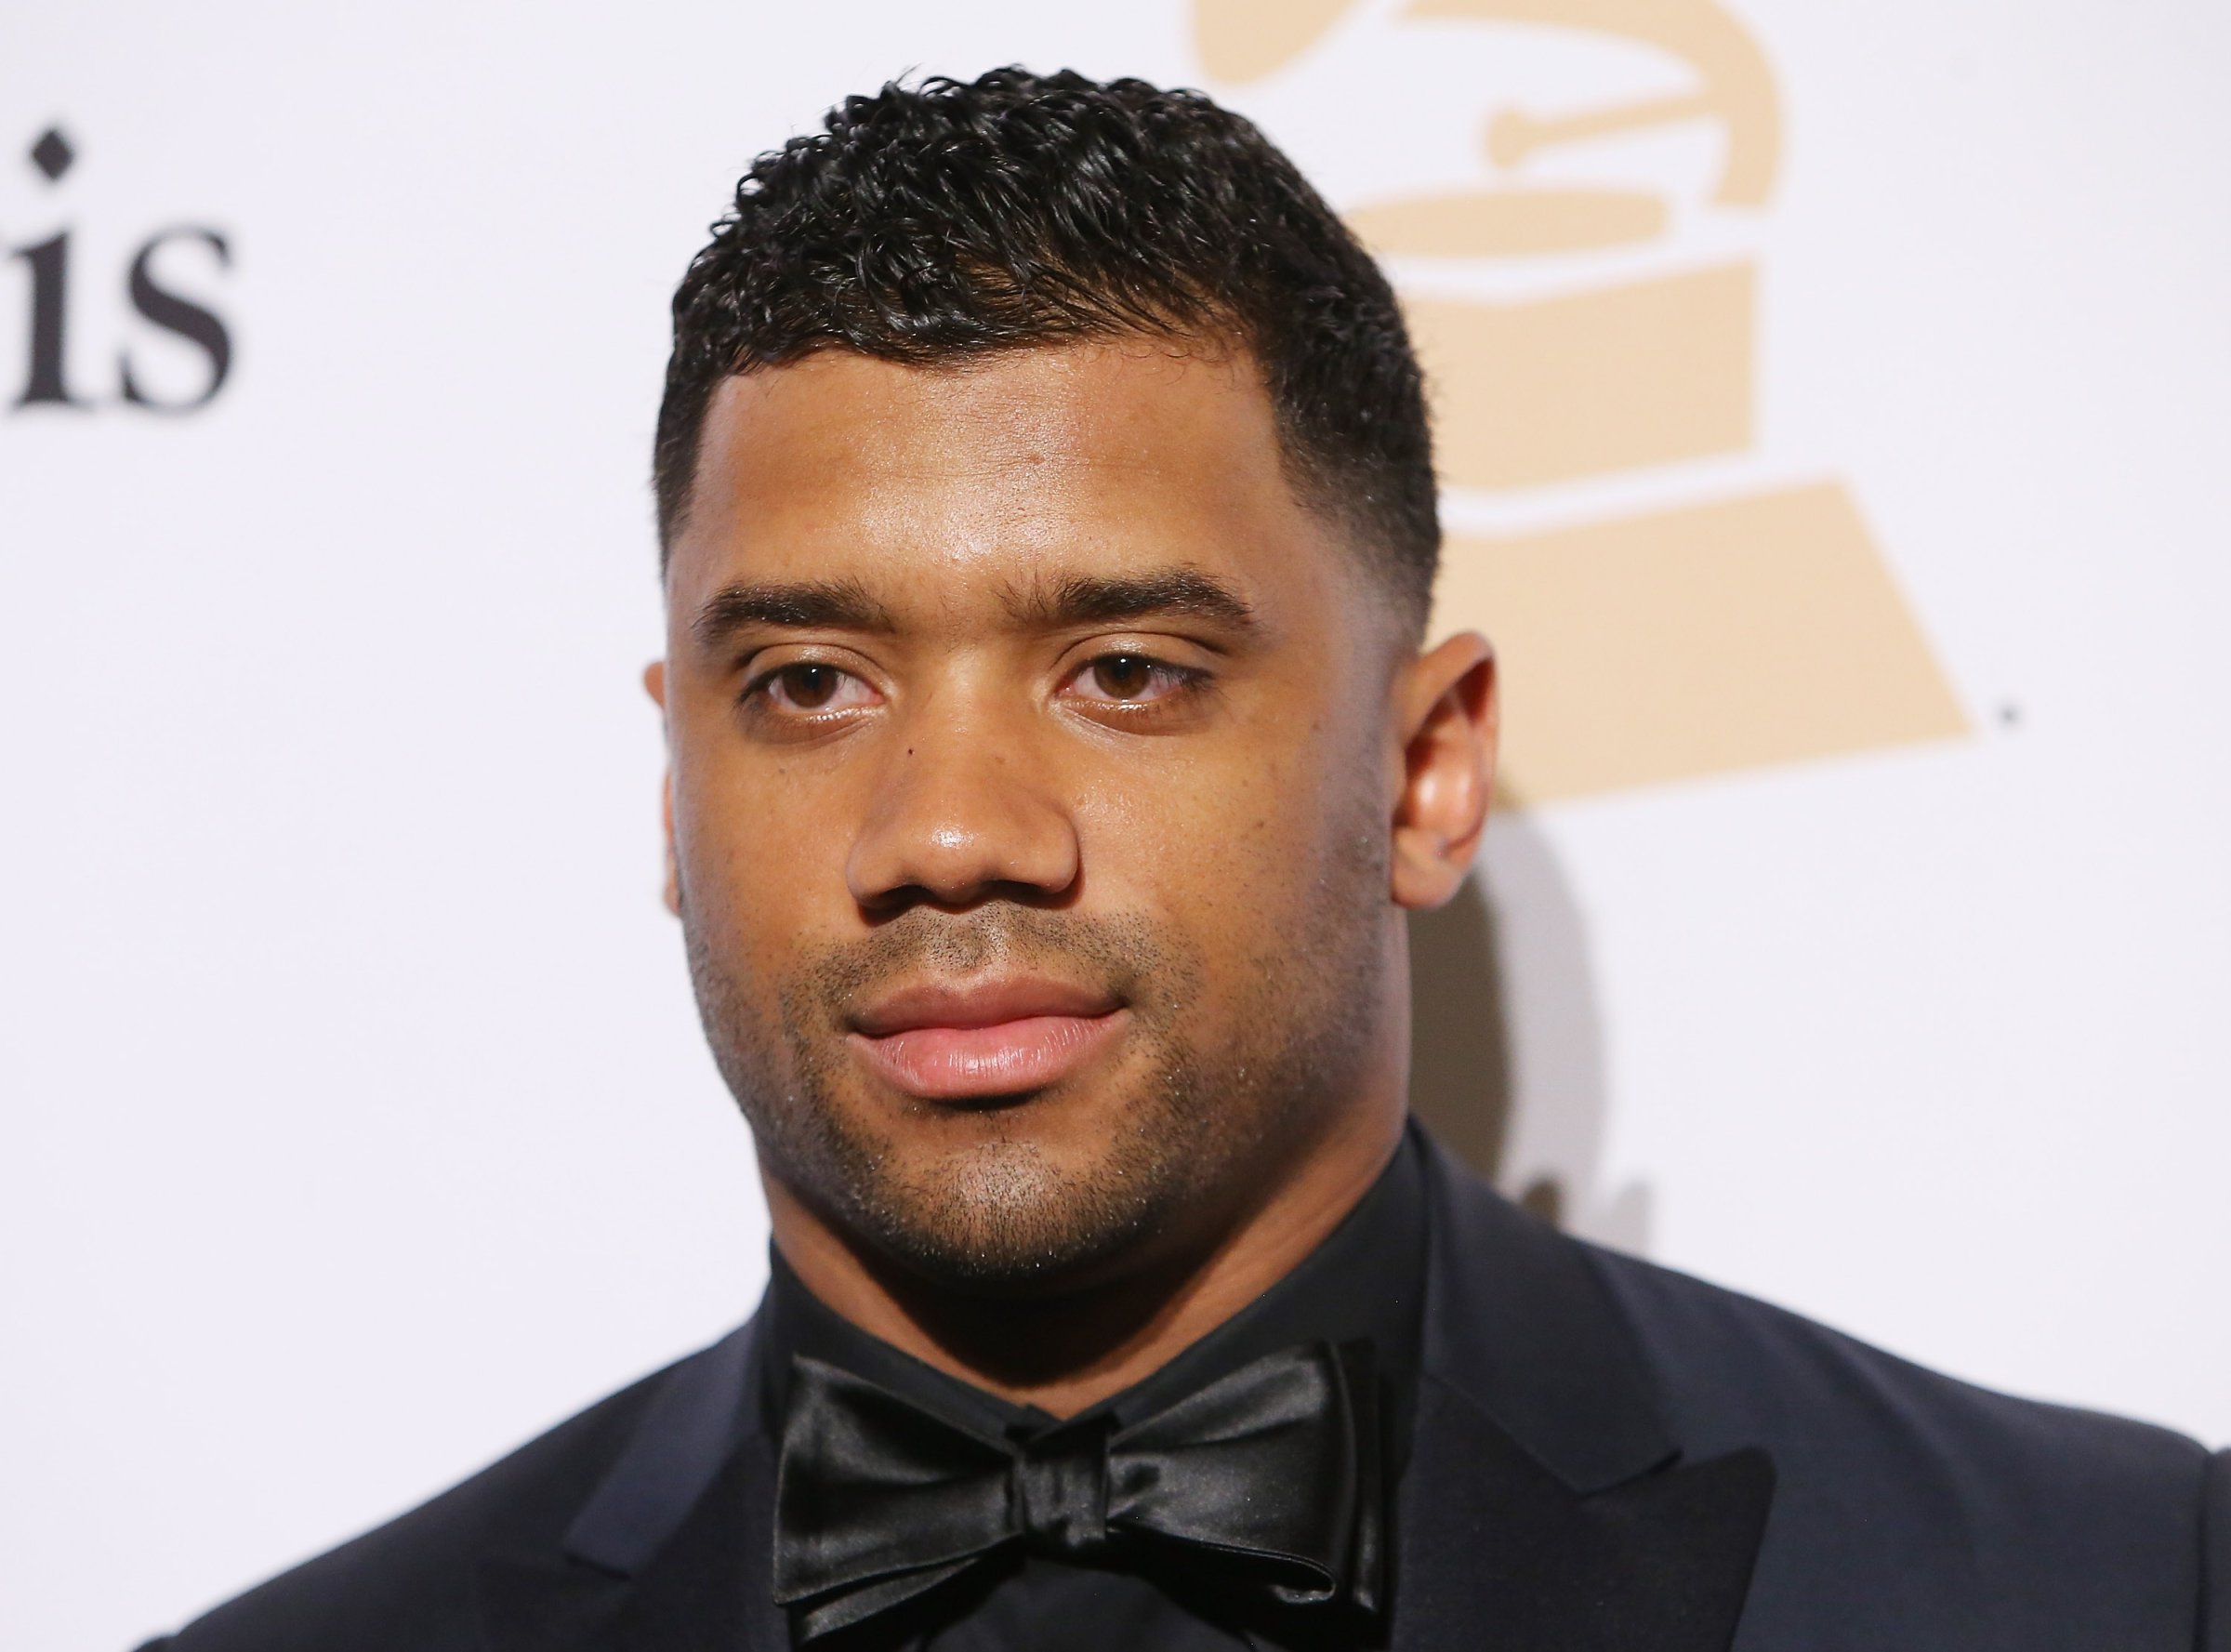 Russell Wilson arrives at the 2016 Pre-GRAMMY Gala and Salute to Industry Icons honoring Irving Azoff held at The Beverly Hilton Hotel in Beverly Hills, Calif. on Feb. 14, 2016.